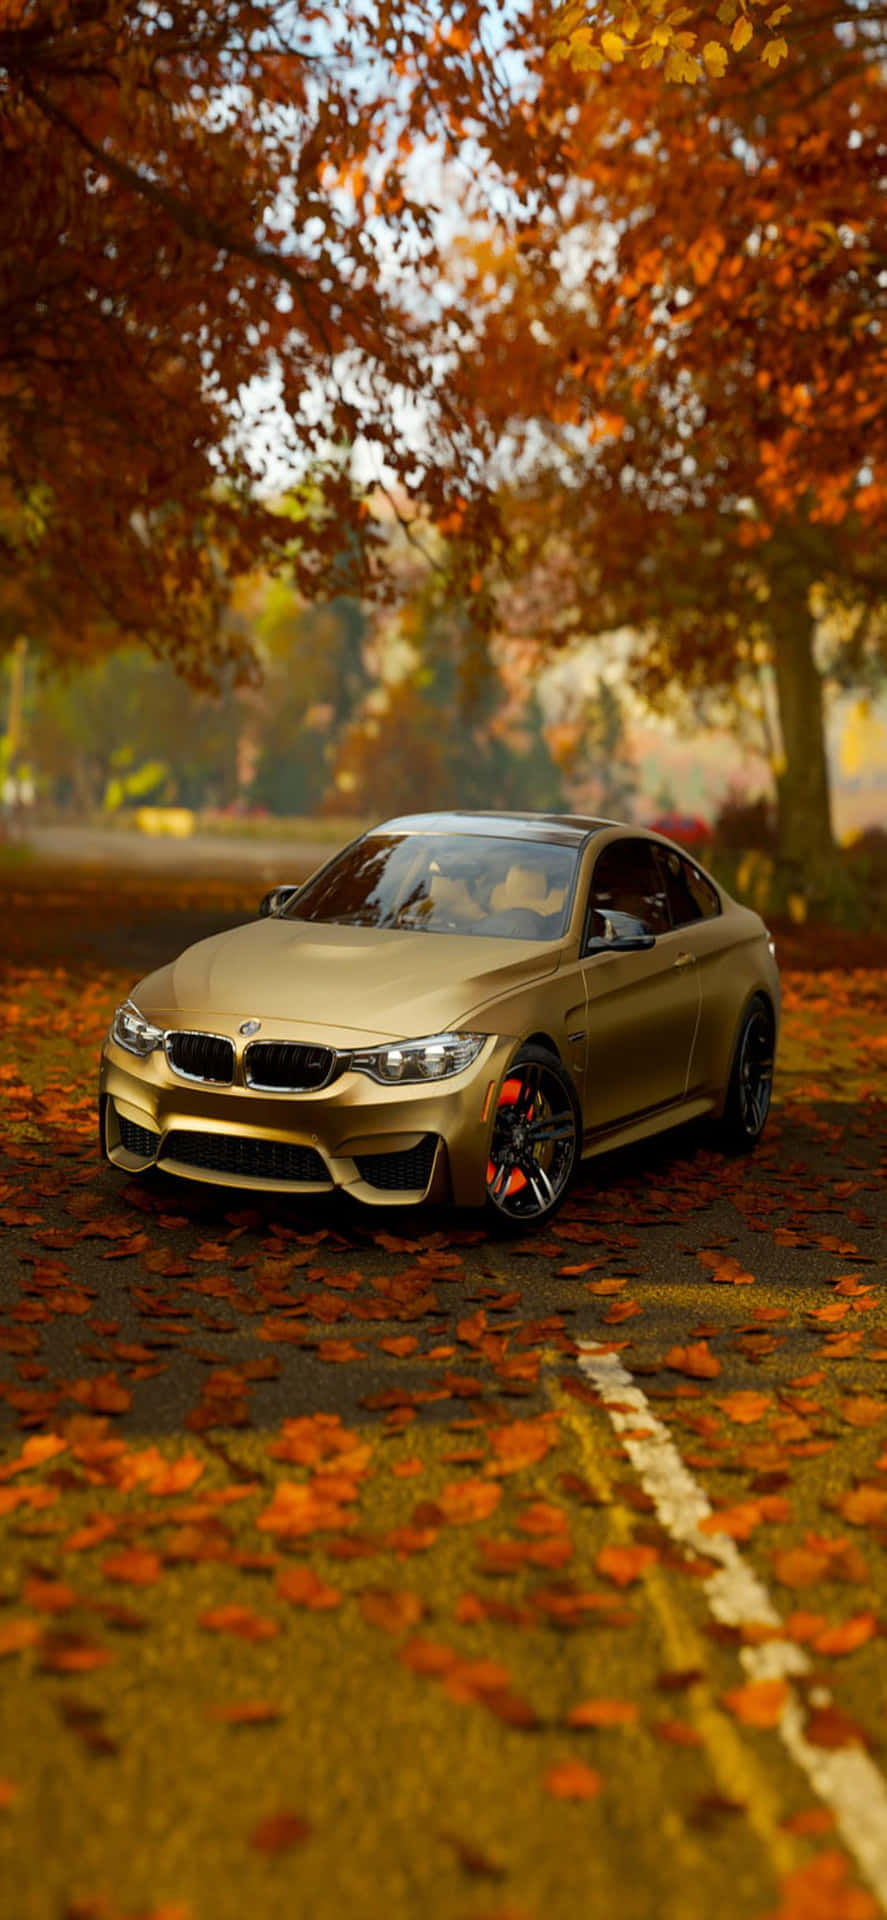 Reach New Horizons with the Iphone Xs and Forza Horizon 4